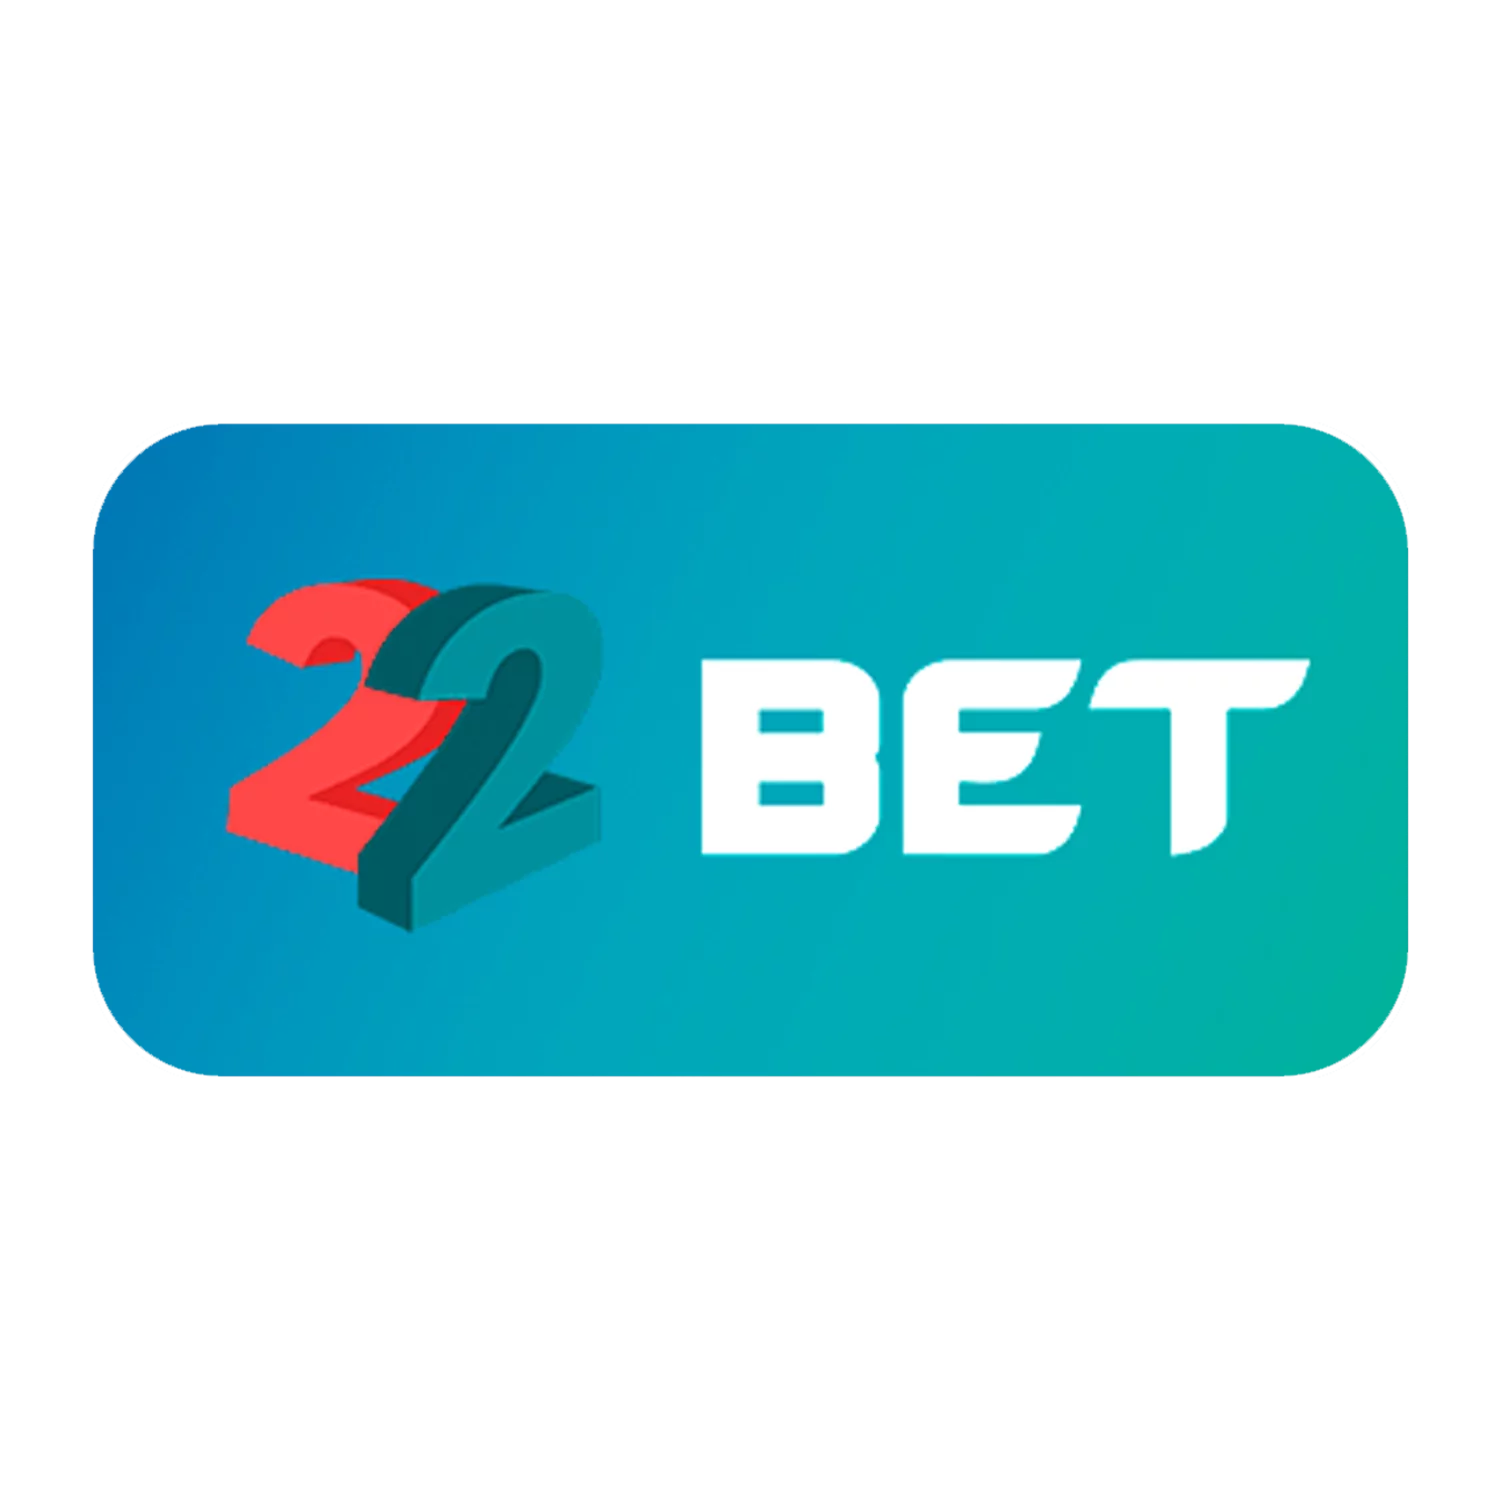 22Bet is one of the safest cricket betting sites in India.